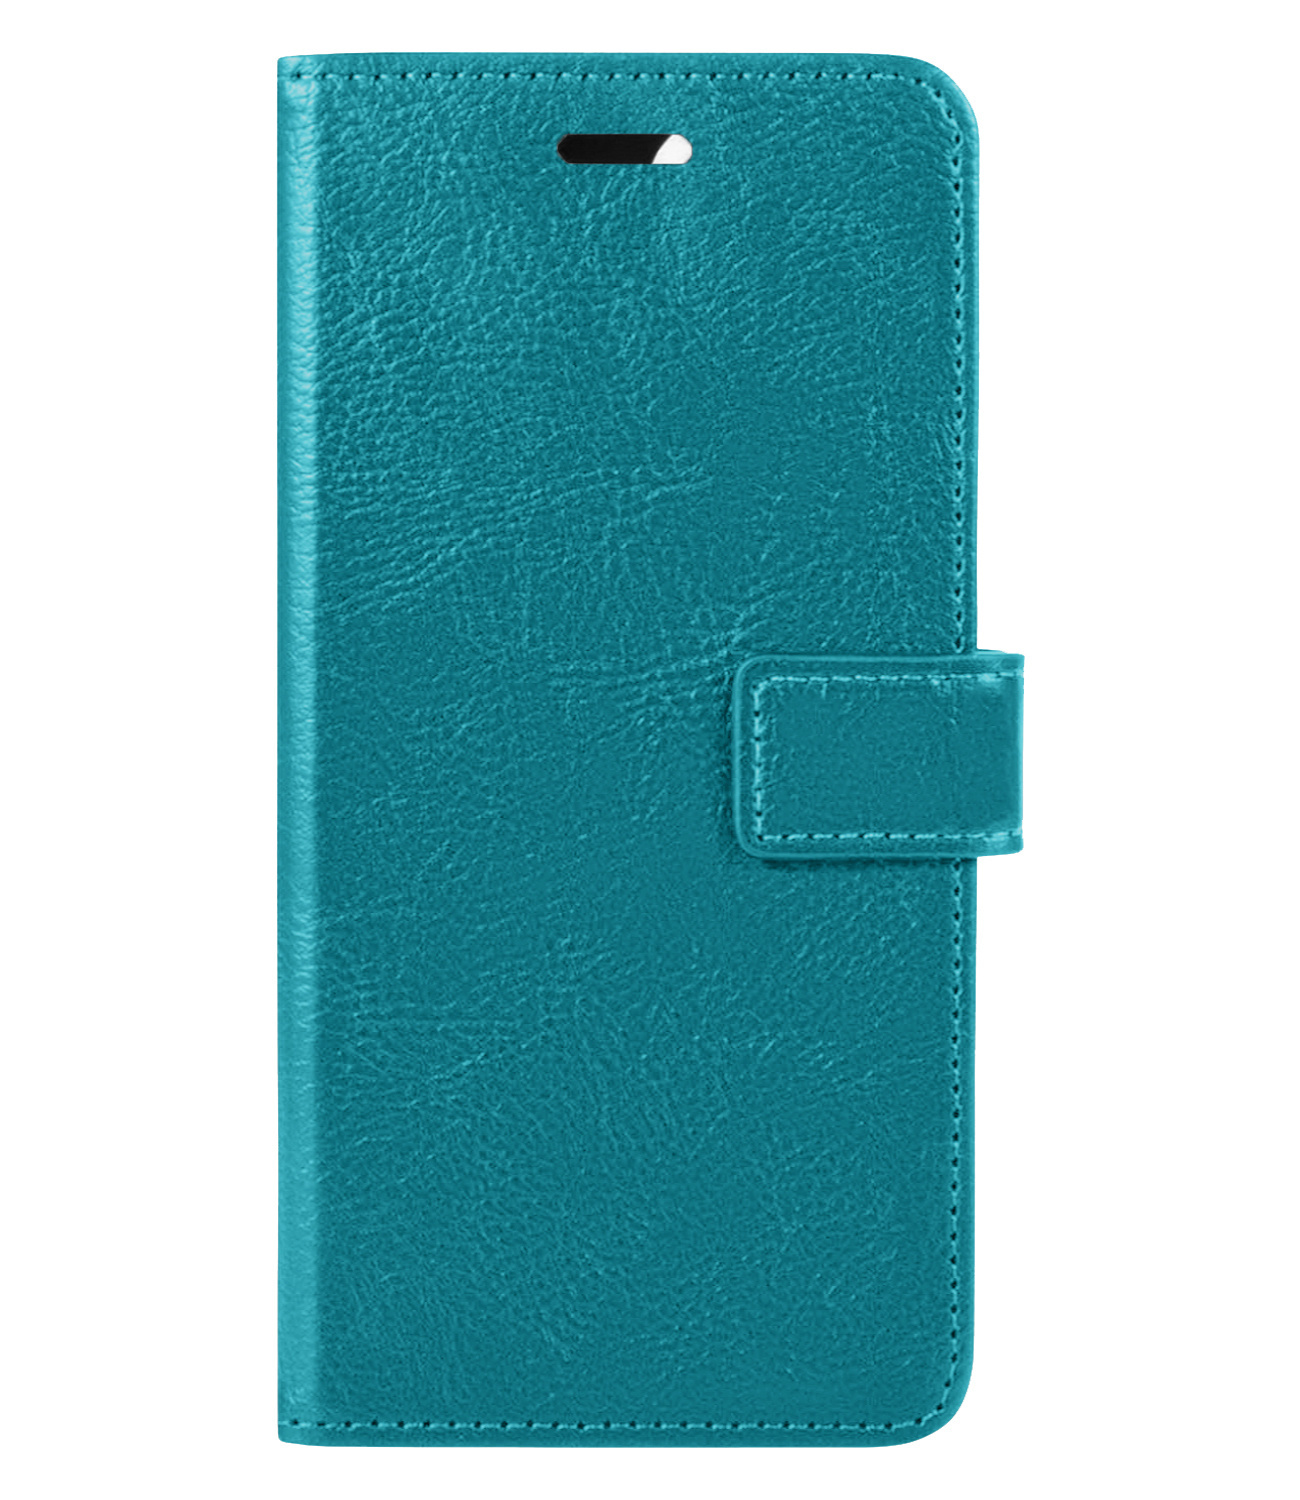 BASEY. iPhone 13 Pro Max Hoesje Bookcase 2x Screenprotector - iPhone 13 Pro Max Case Hoes Cover - iPhone 13 Pro Max Screenprotector 2x - Turquoise